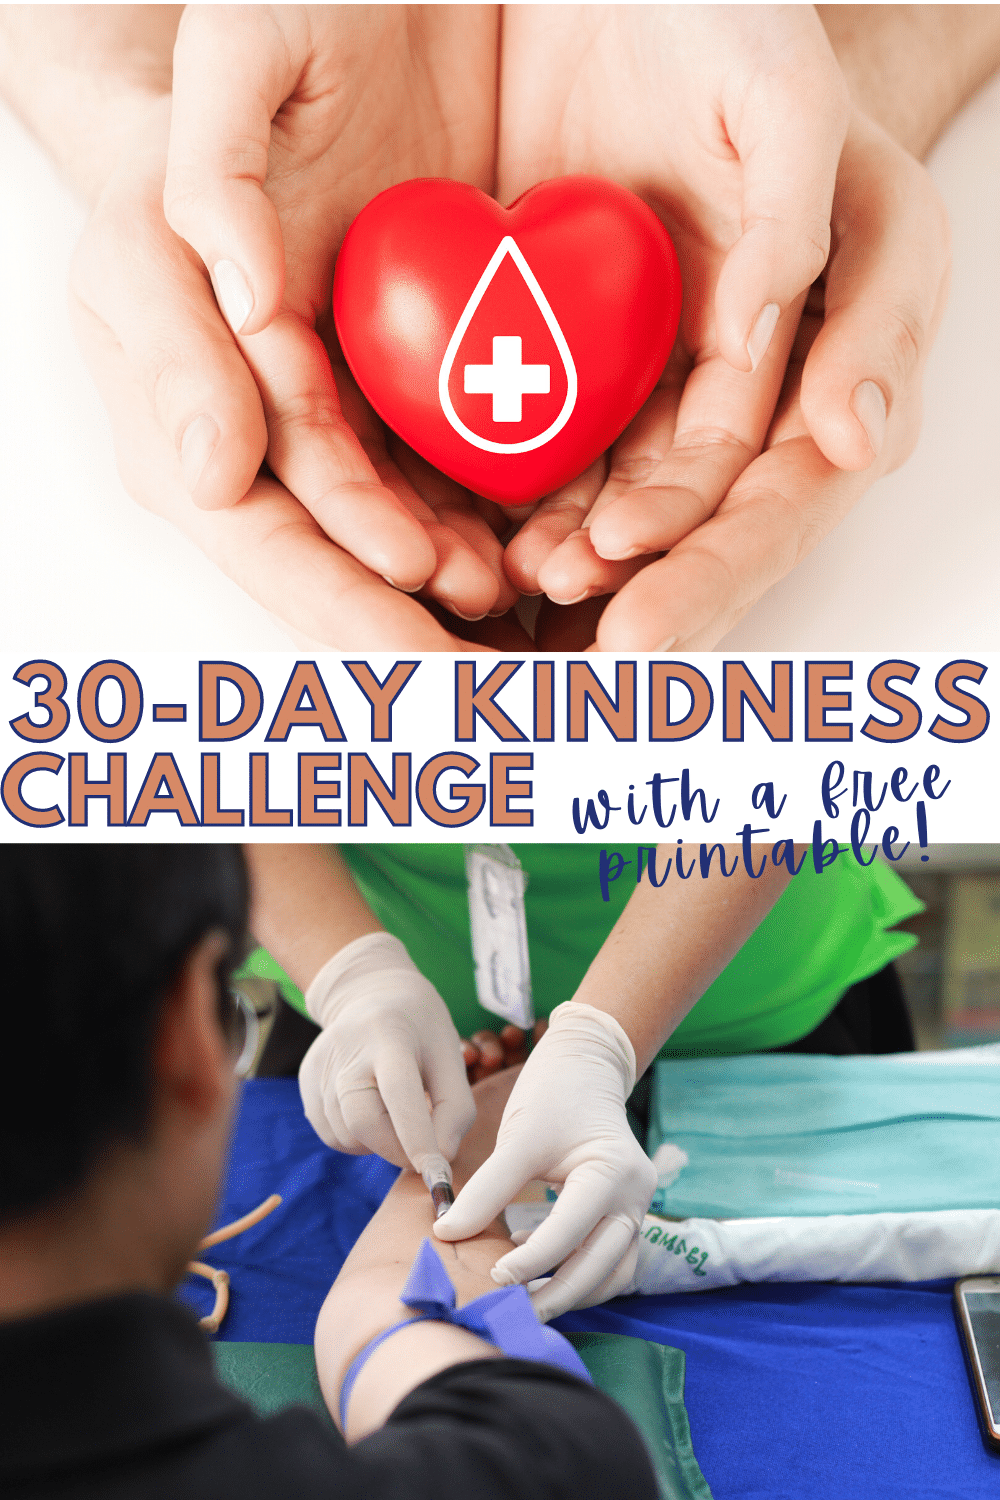 This easy 30 Day Kindness Challenge comes with a free printable to help make it simple to remember to do your random act of kindness every day. #kindness #30daychallenge #printables via @wondermomwannab